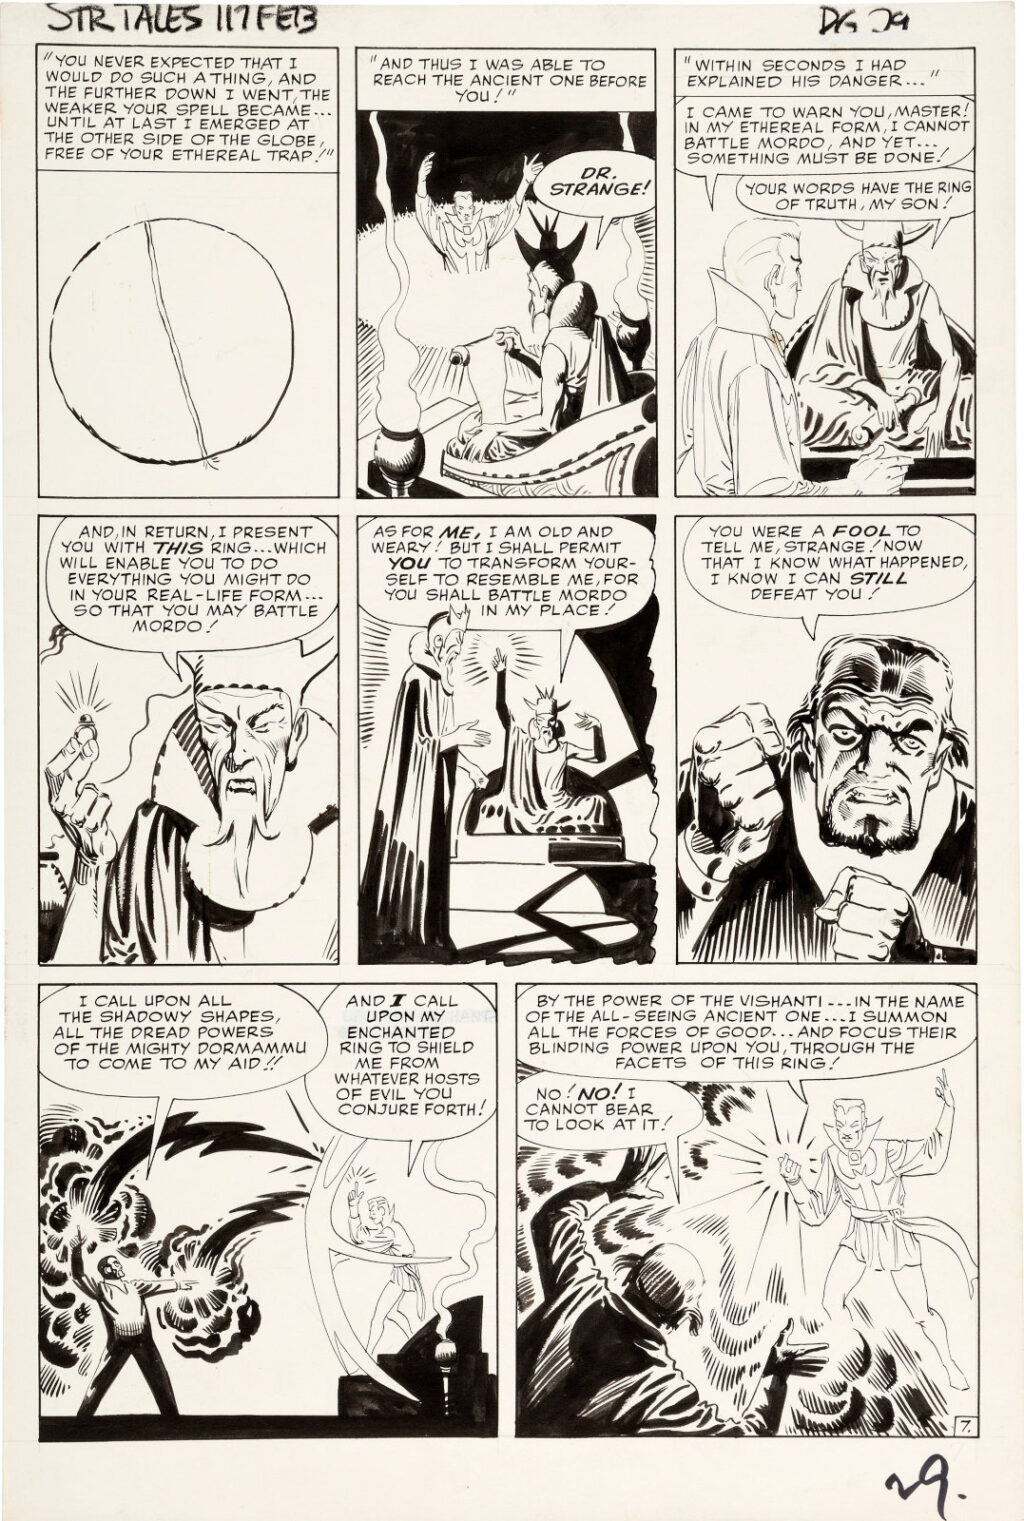 Strange Tales issue 117 page 7 by Steve Ditko